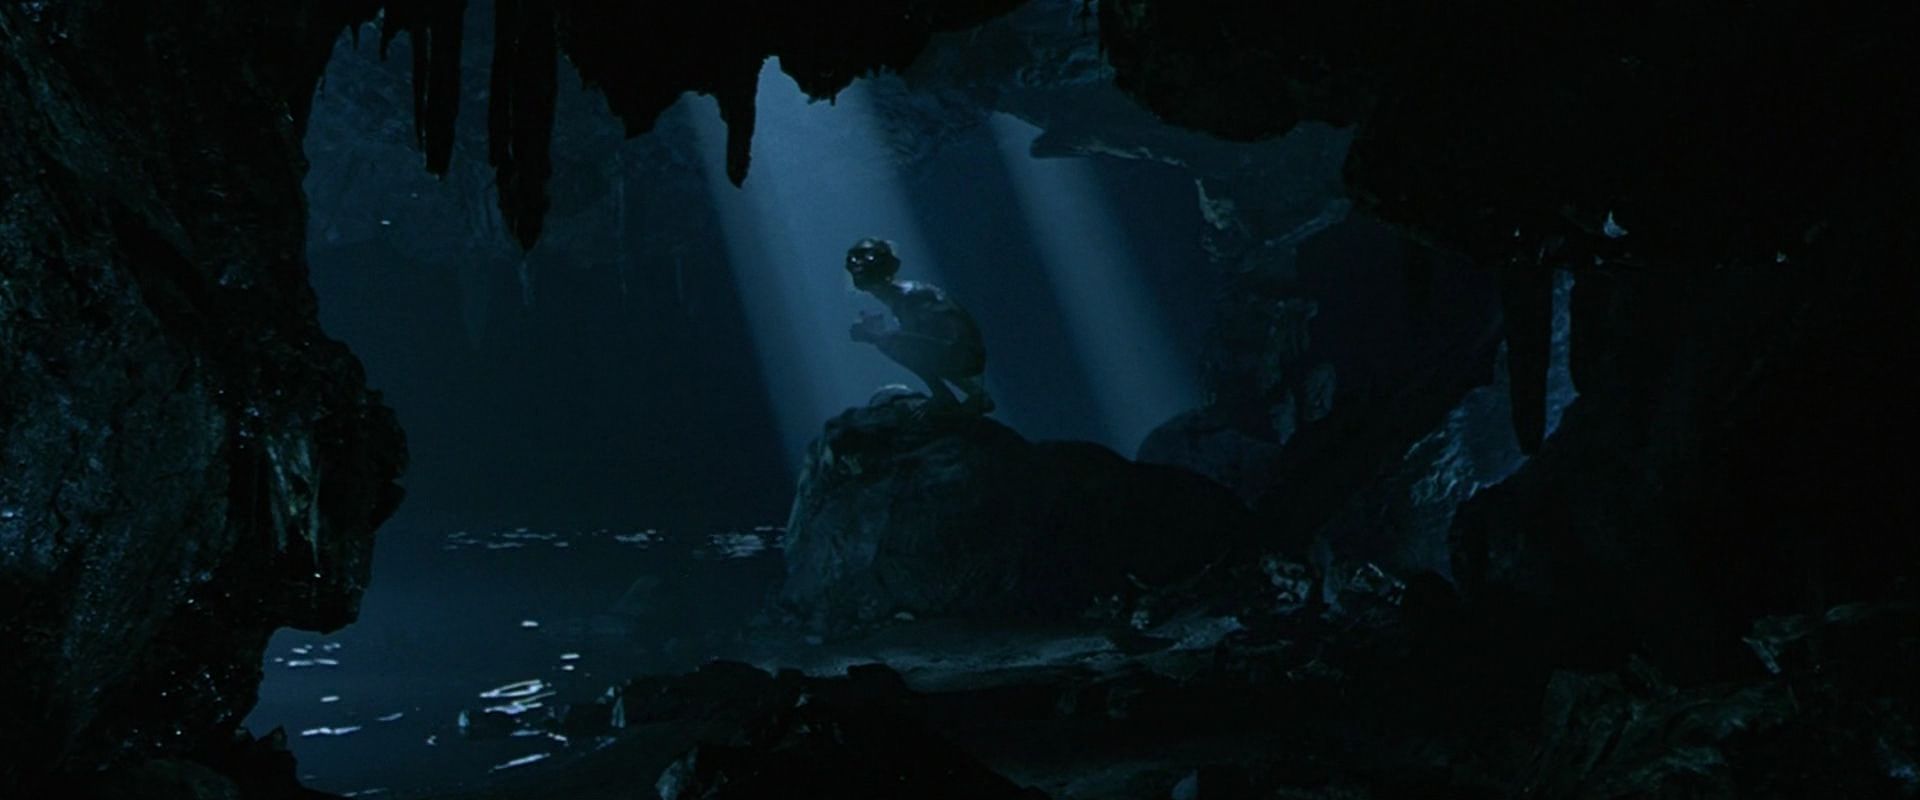 Prologue: Gollum in the Misty Mountains